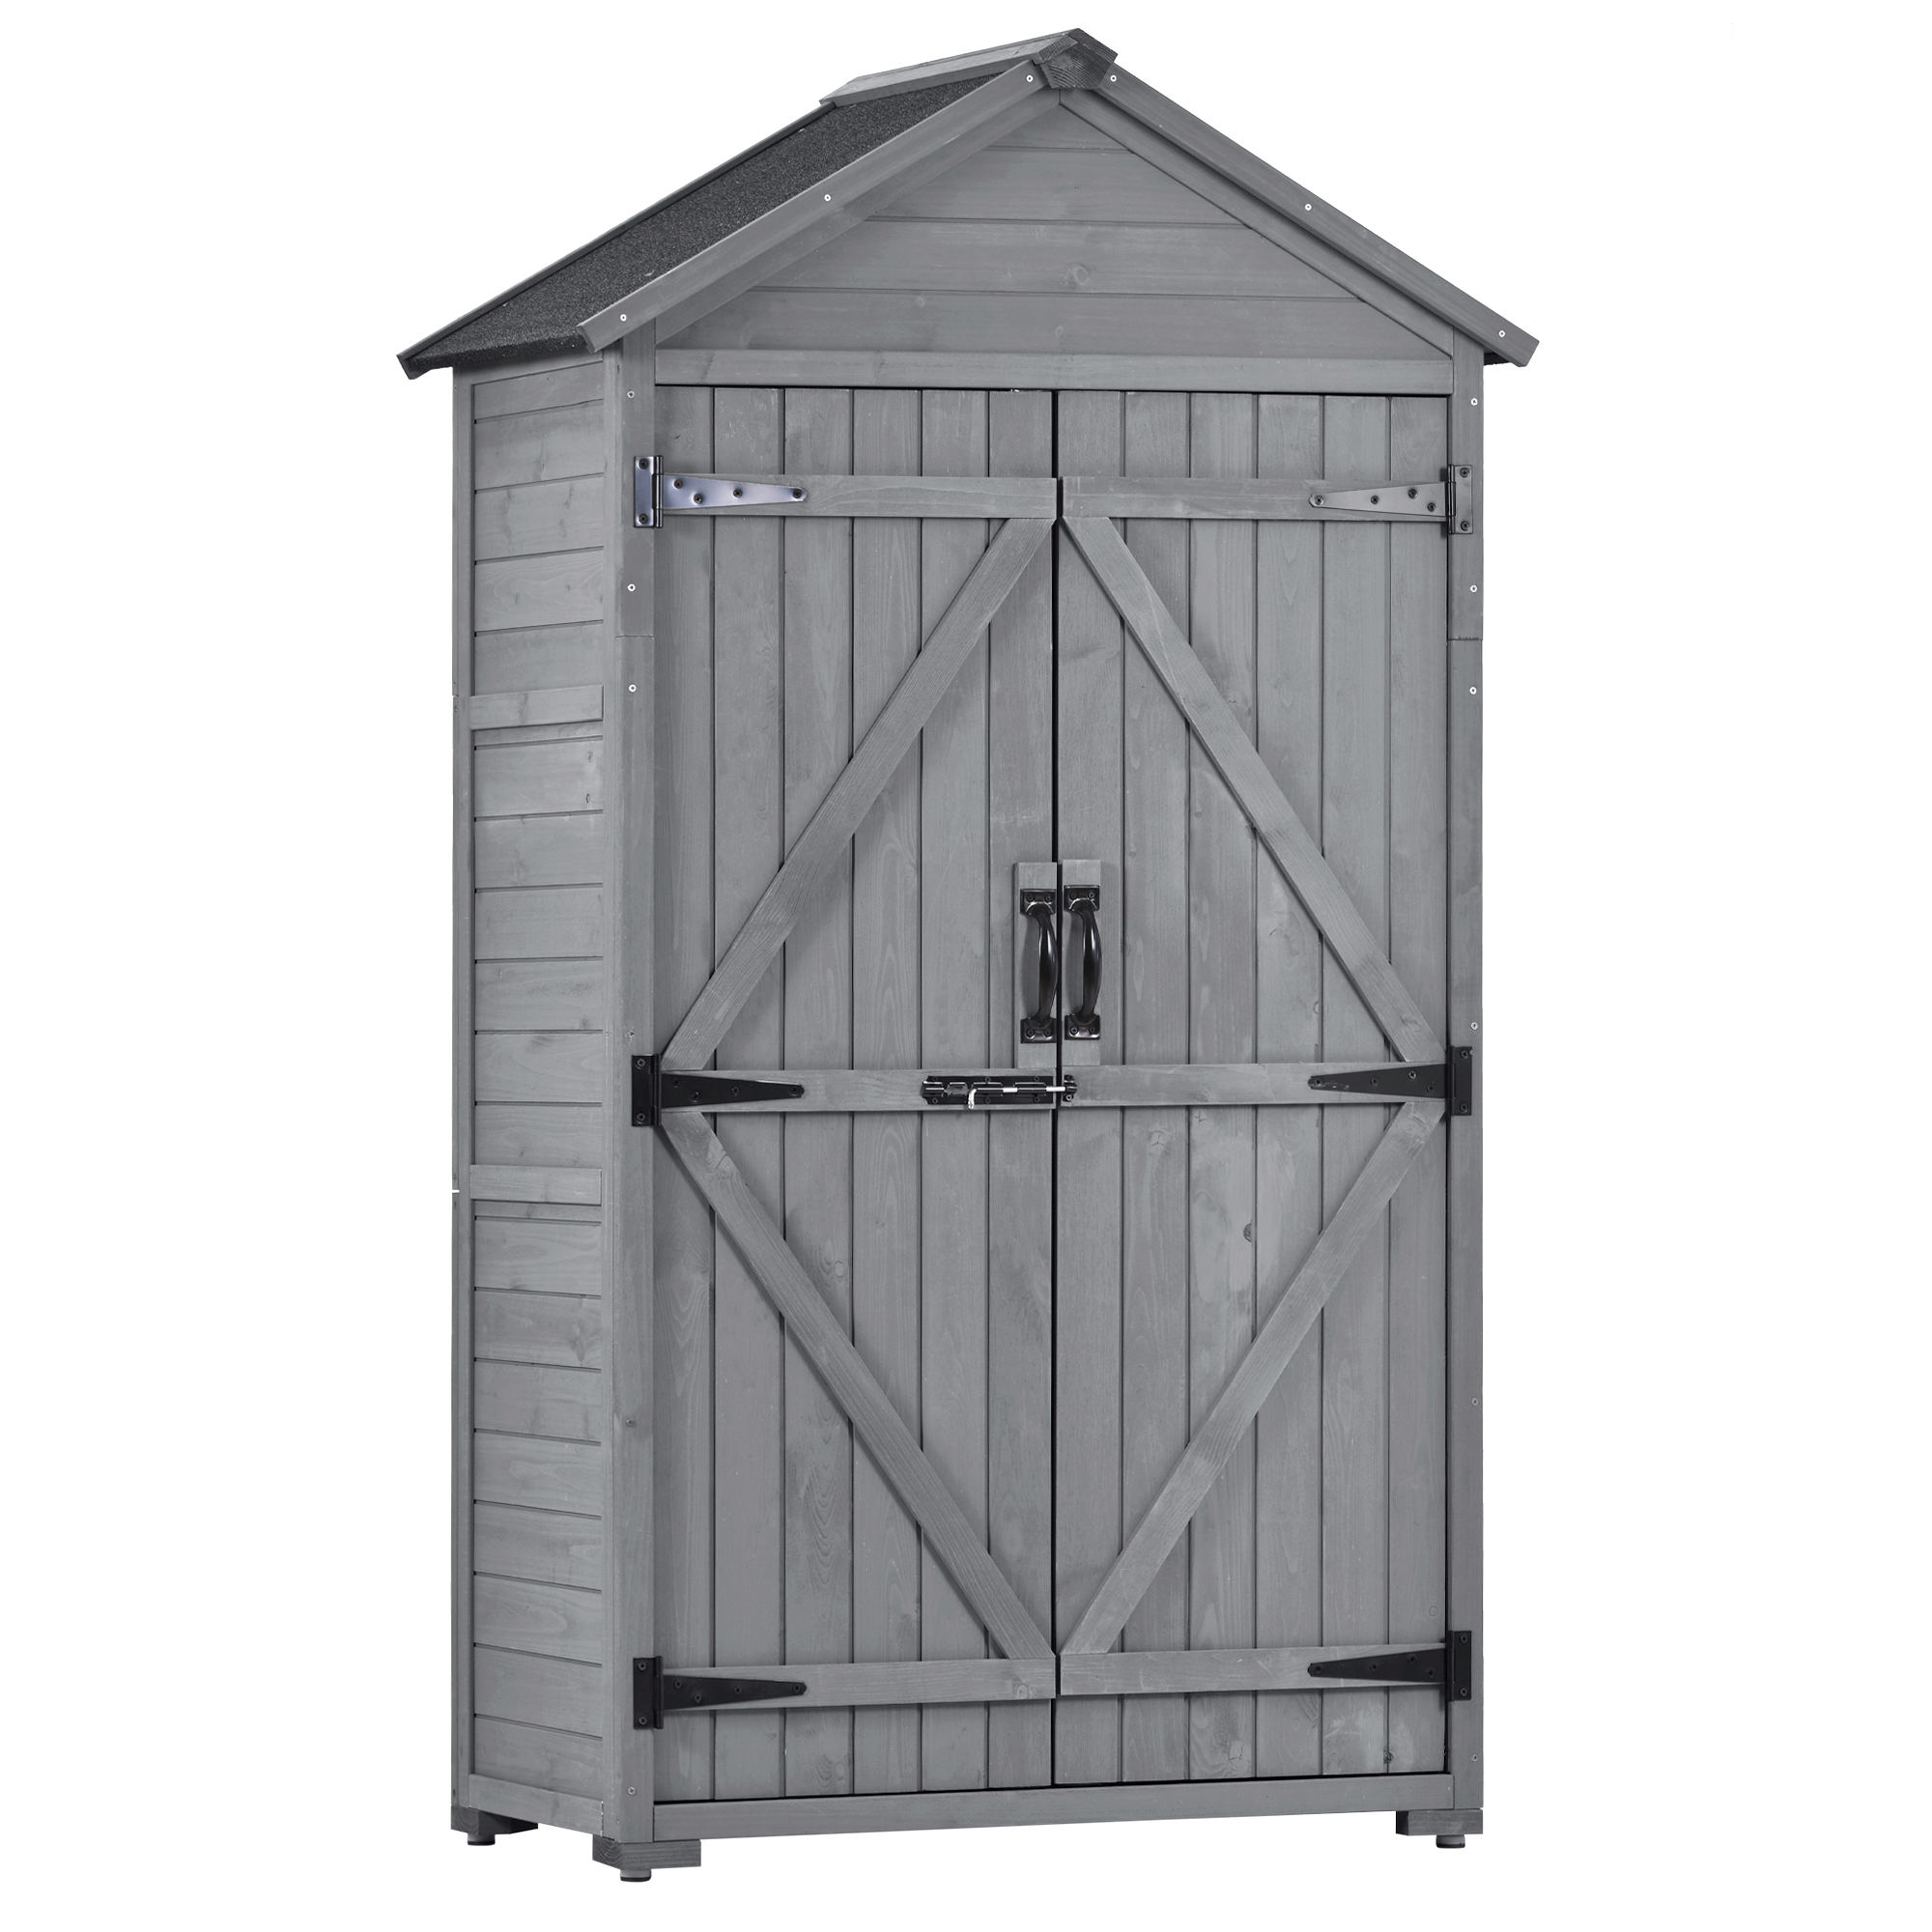 5.8ft * 3ft Outdoor Wood Lean-to Storage Shed